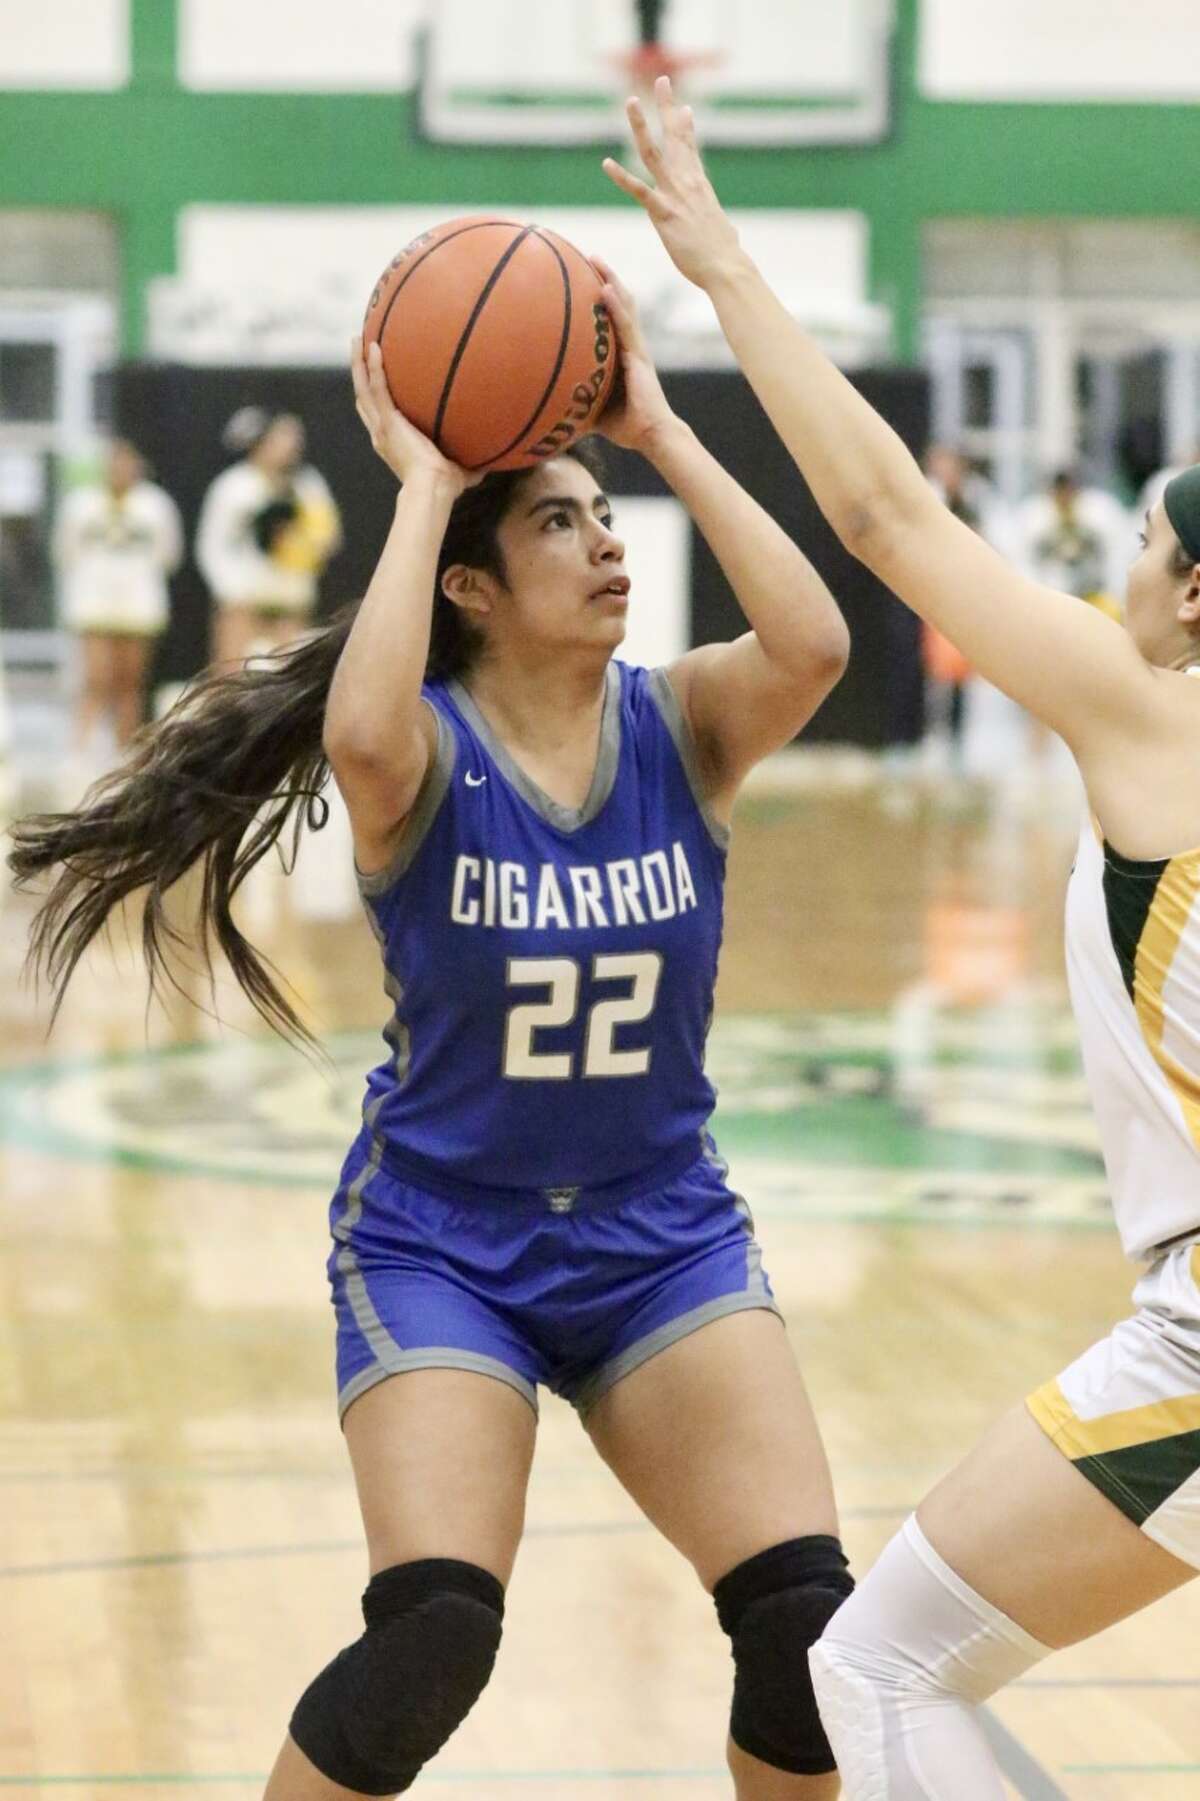 Diane Lara and Cigarroa were eliminated Friday, Feb. 17 with a 53-26 loss to McAllen Nikki Rowe.